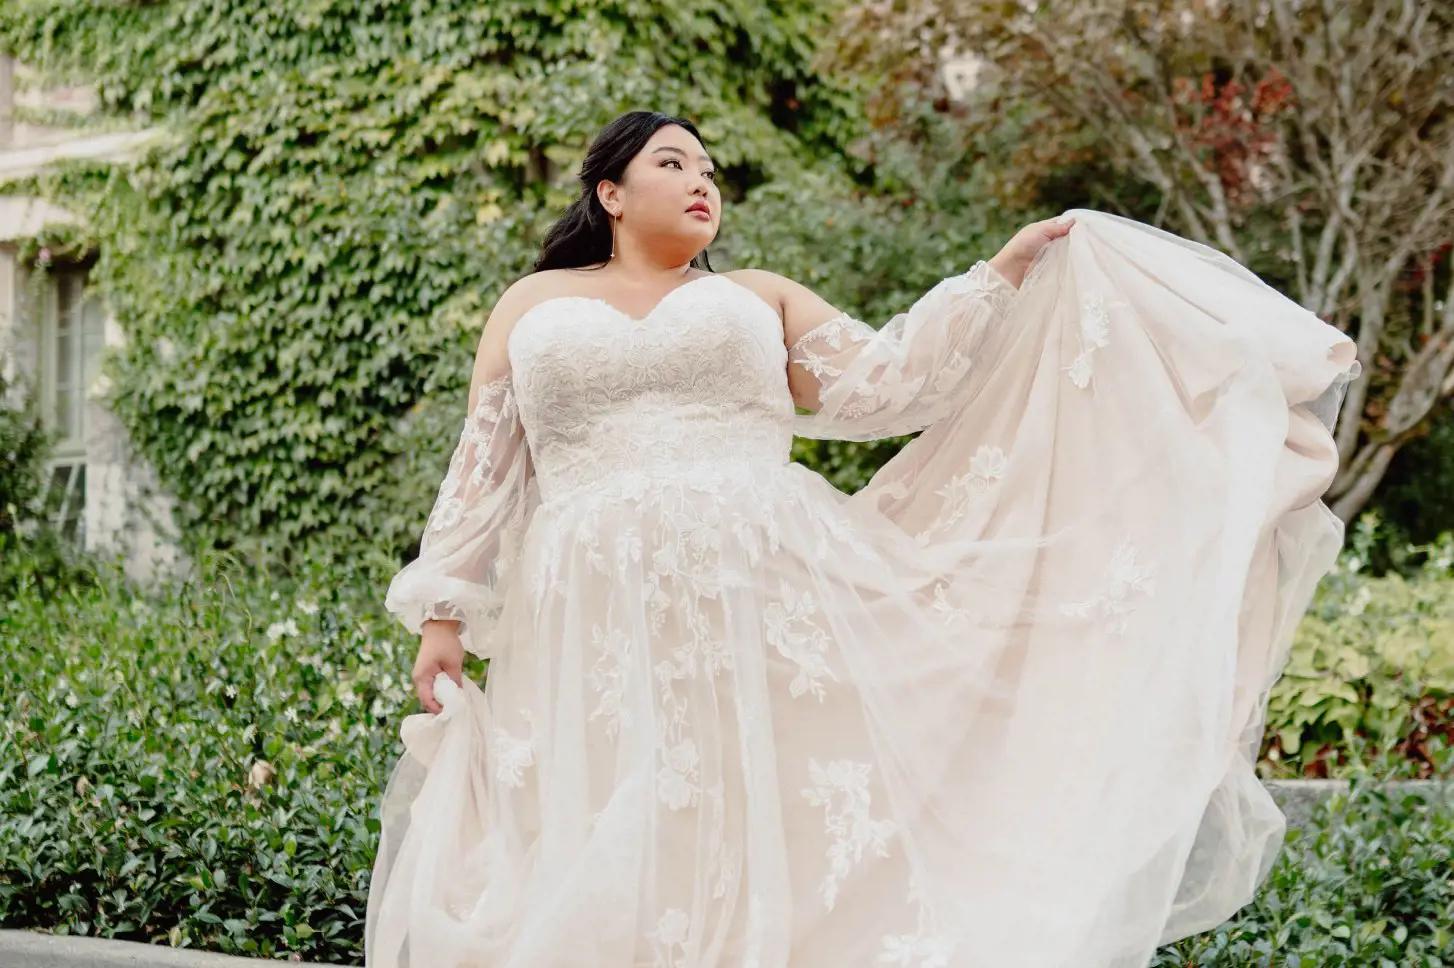 Plus size model wearing a white bridal gown